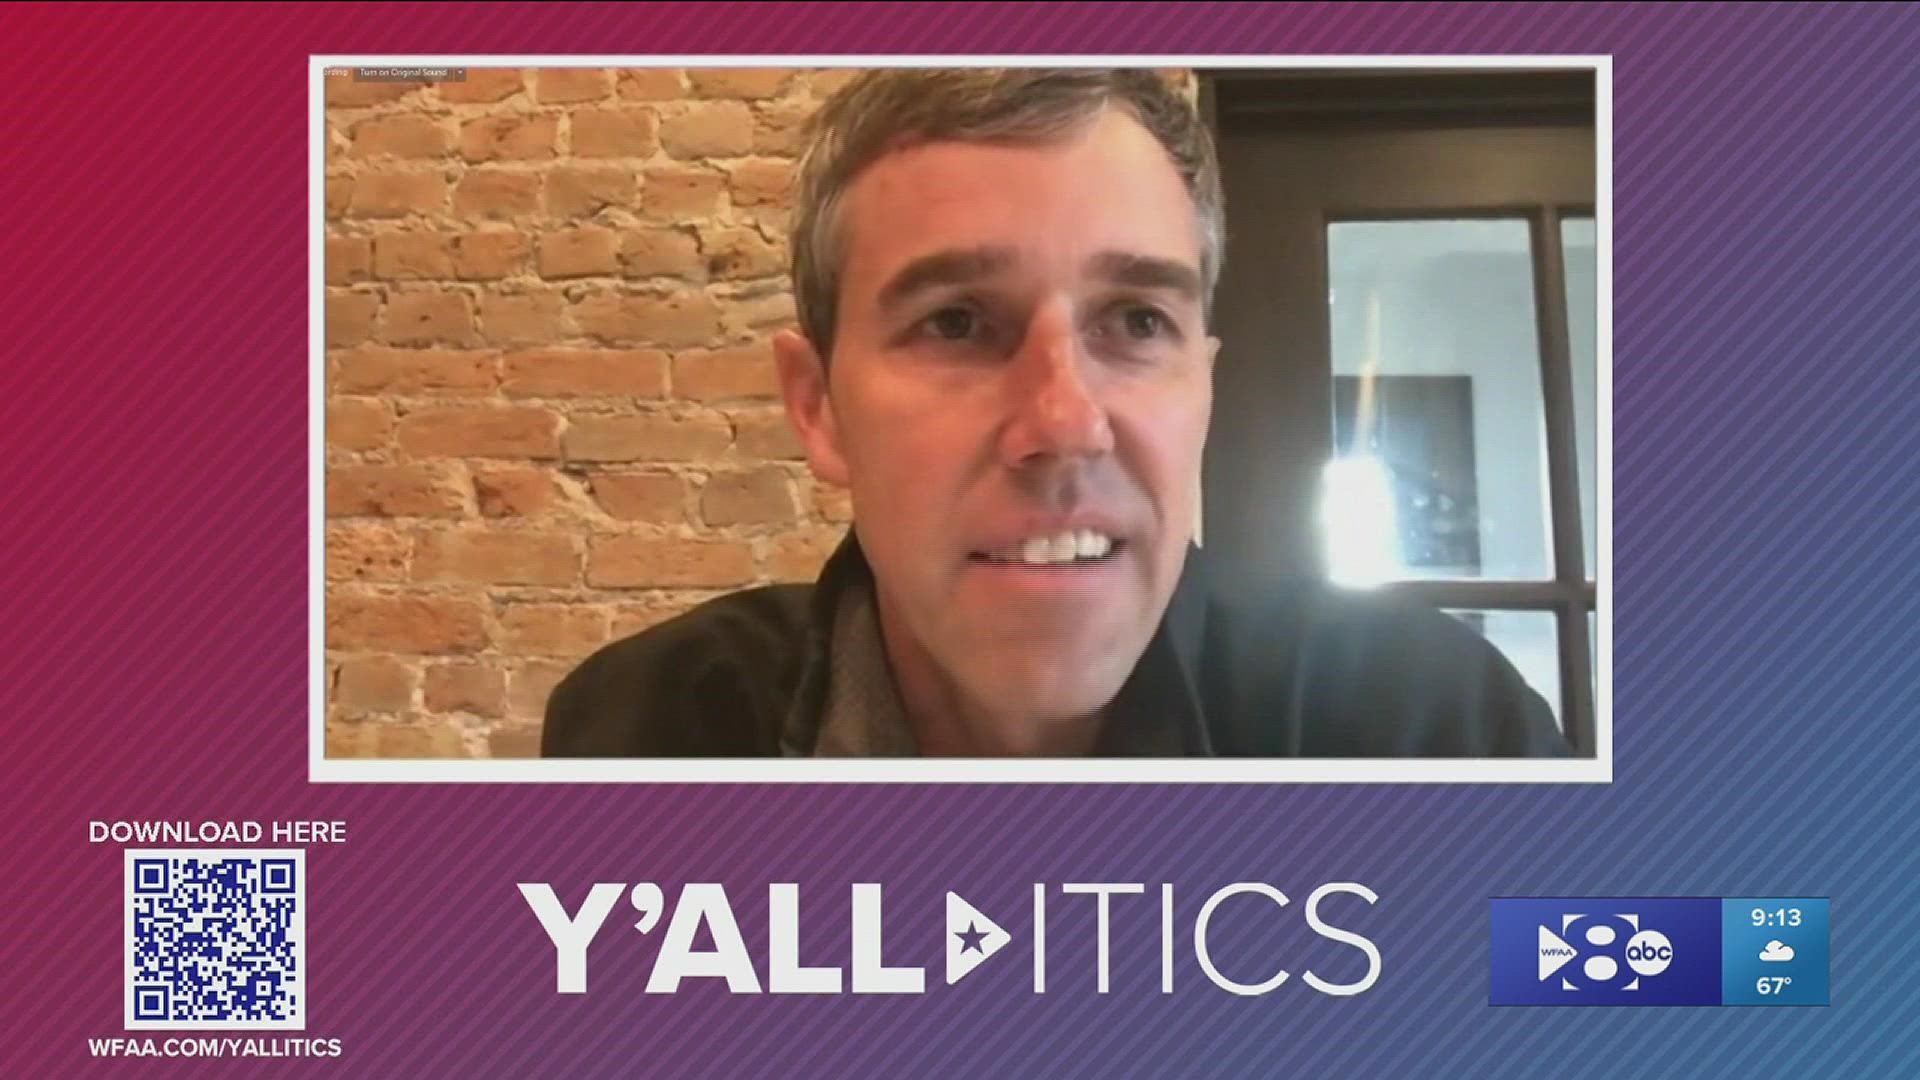 Ninety minutes after announcing his campaign for governor, O'Rourke joined the Y'all-itics podcast.